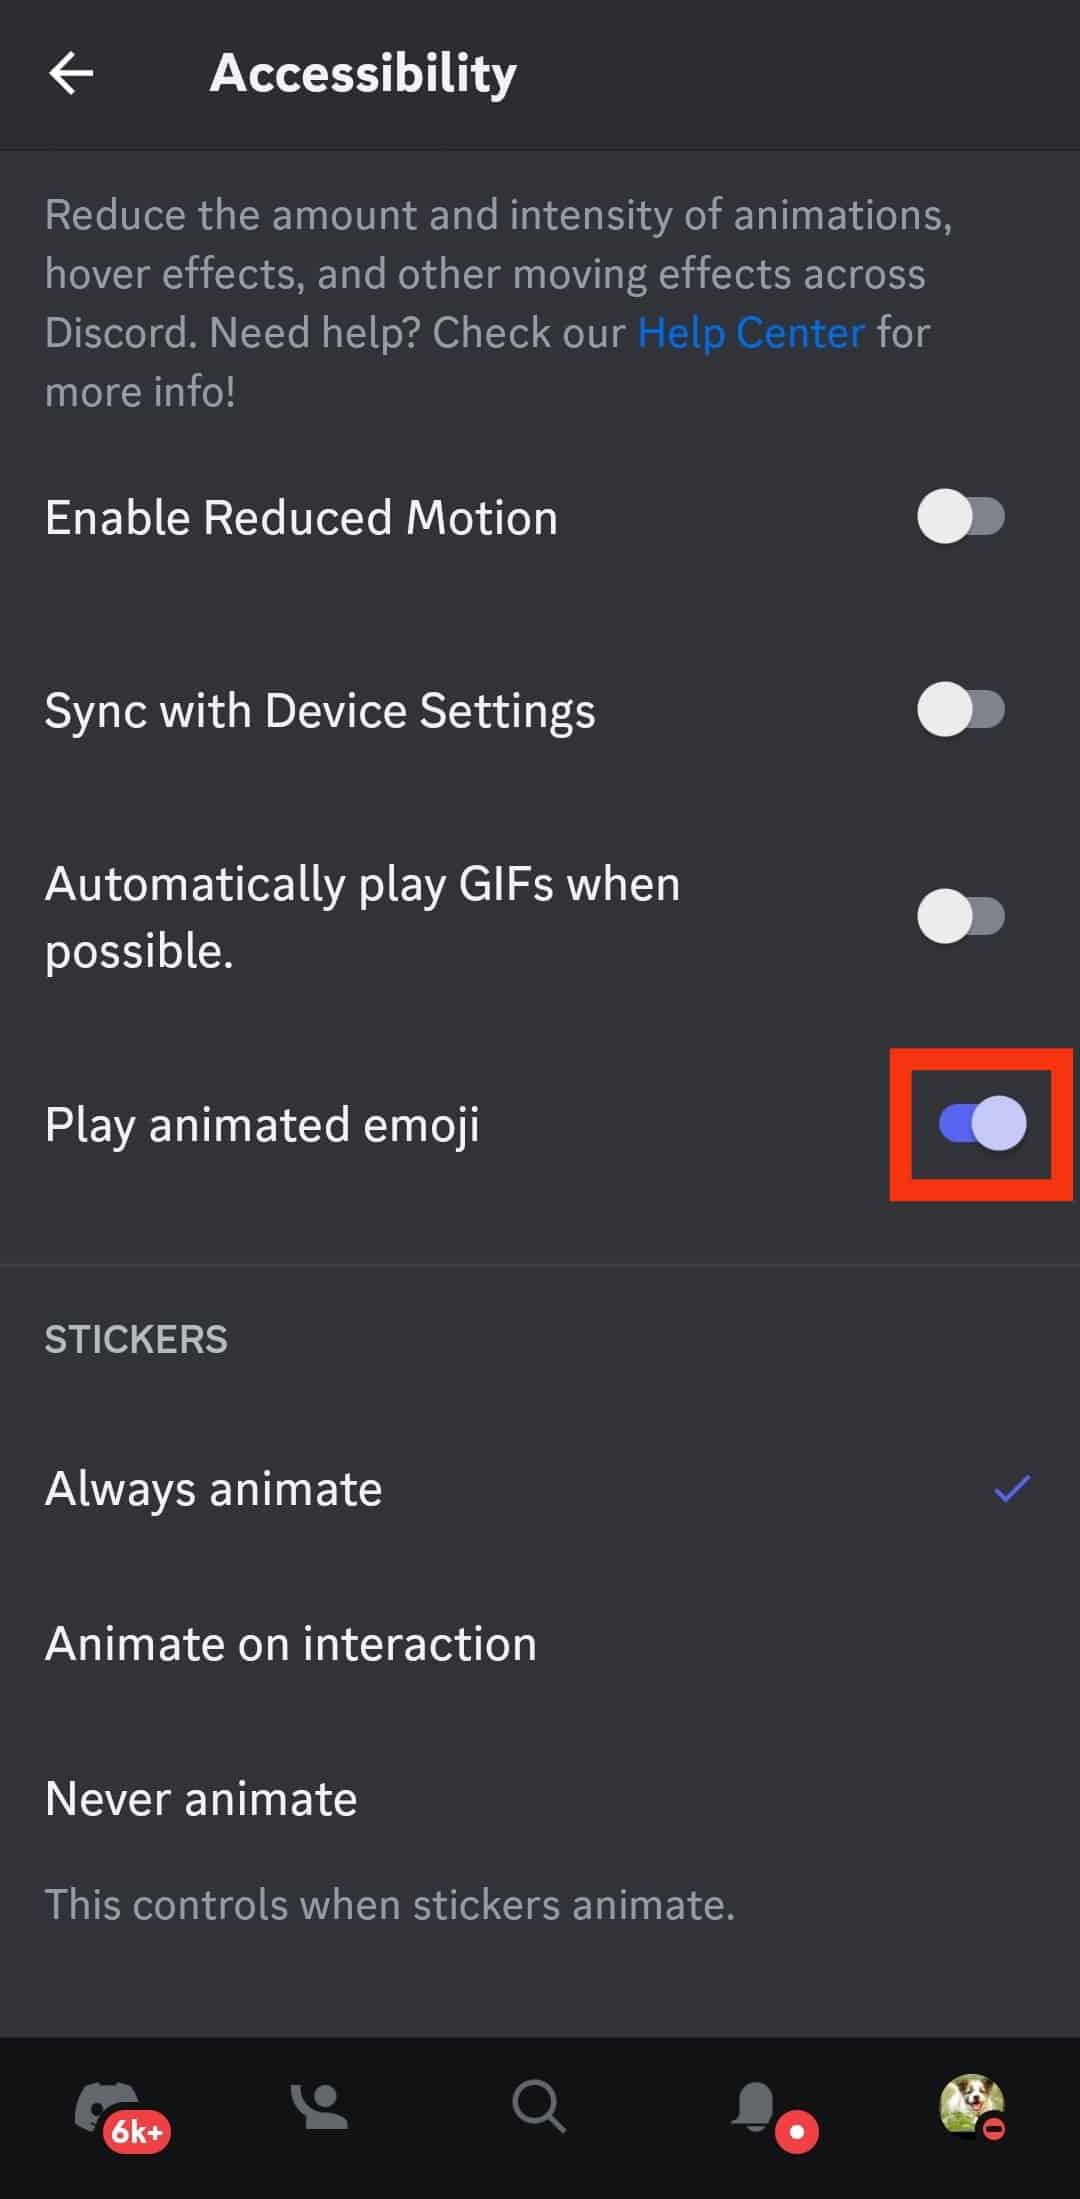 Turn Off The Option For Play Animated Emoji